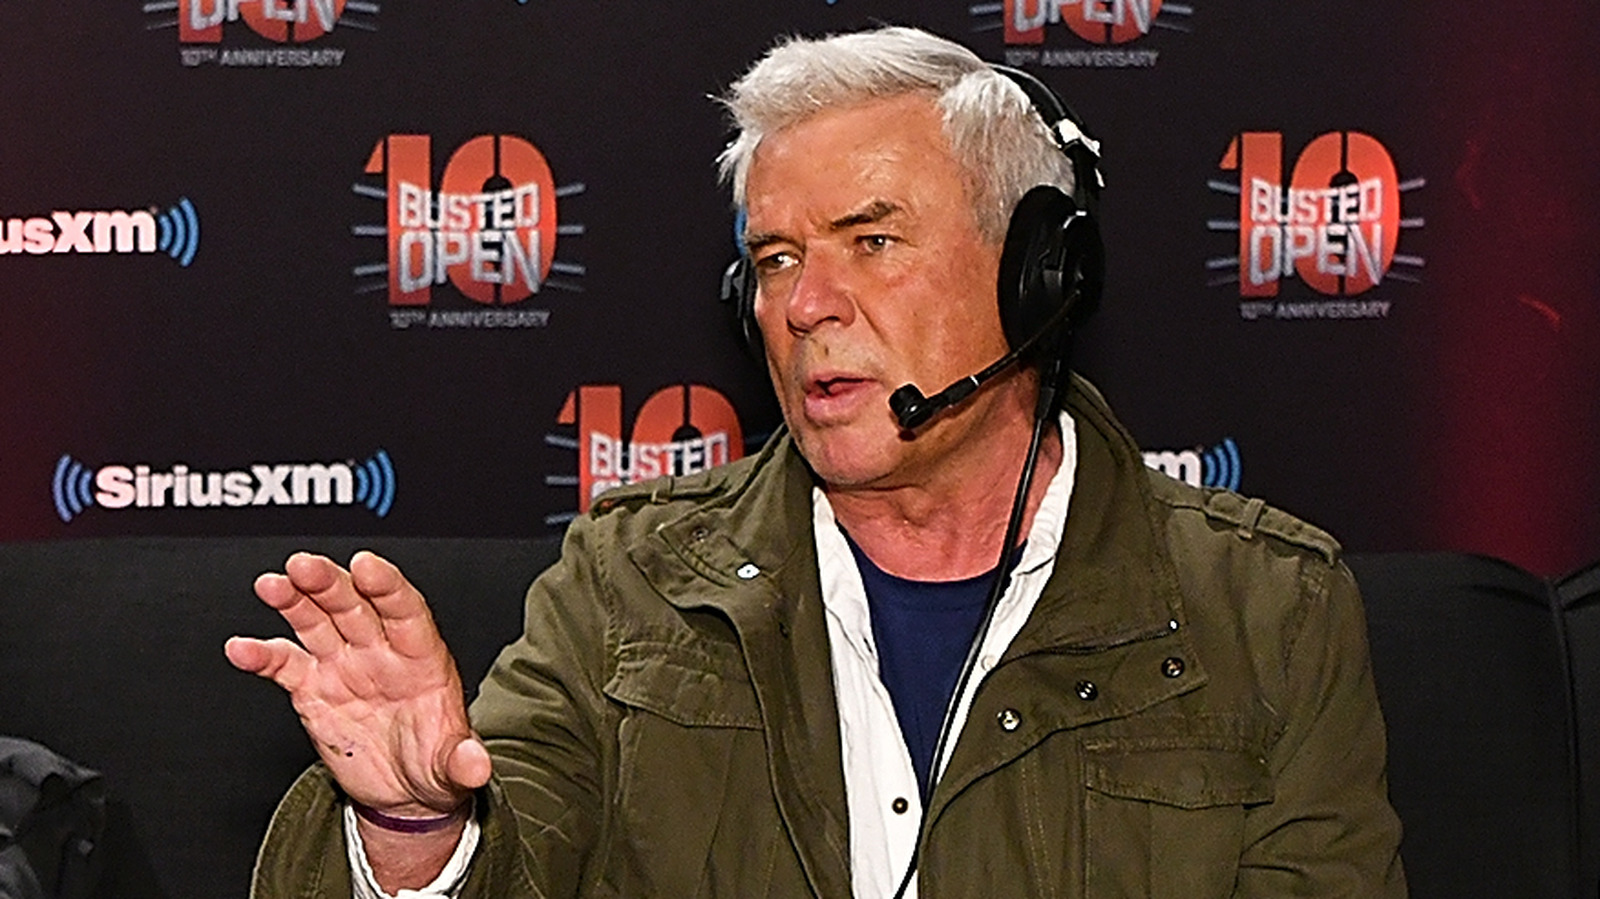 Eric Bischoff Comments On WWE Continuing PPV Following Owen Hart's Death